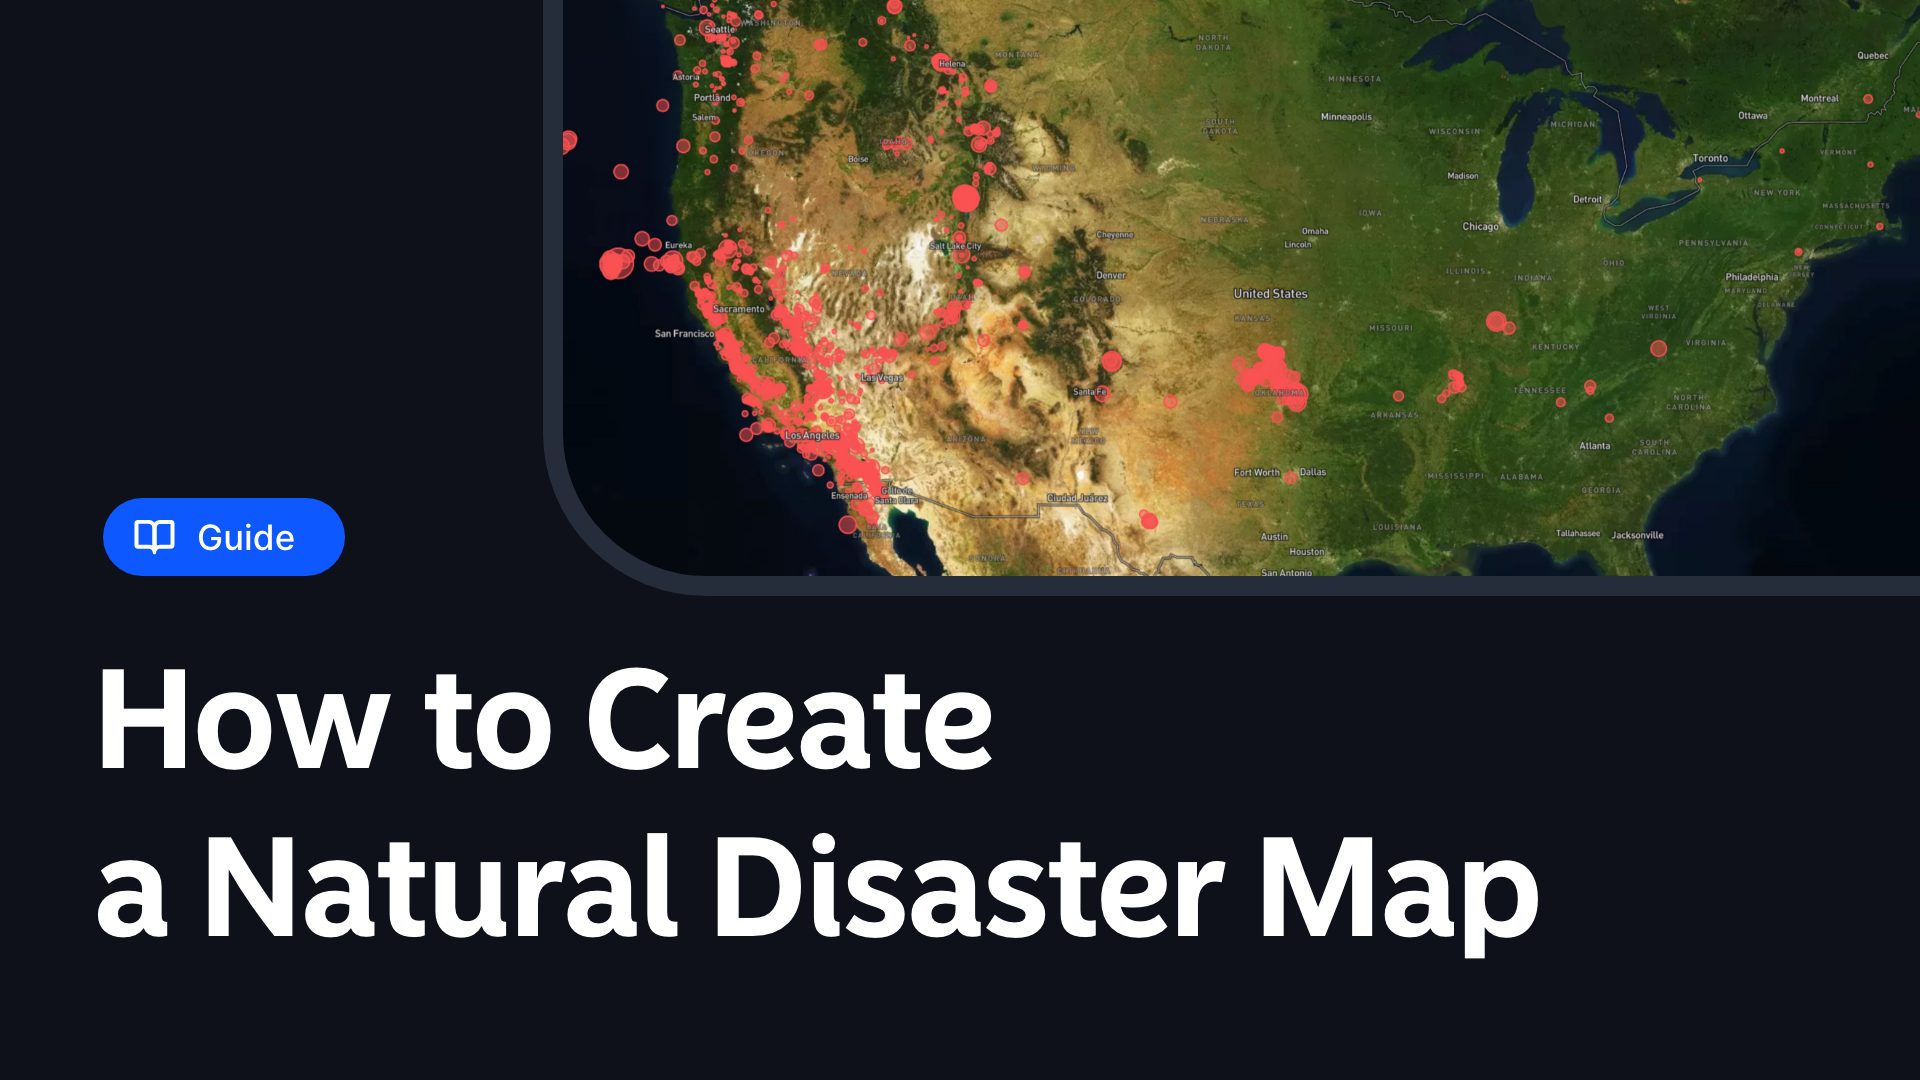 How to Create a Natural Disaster Map